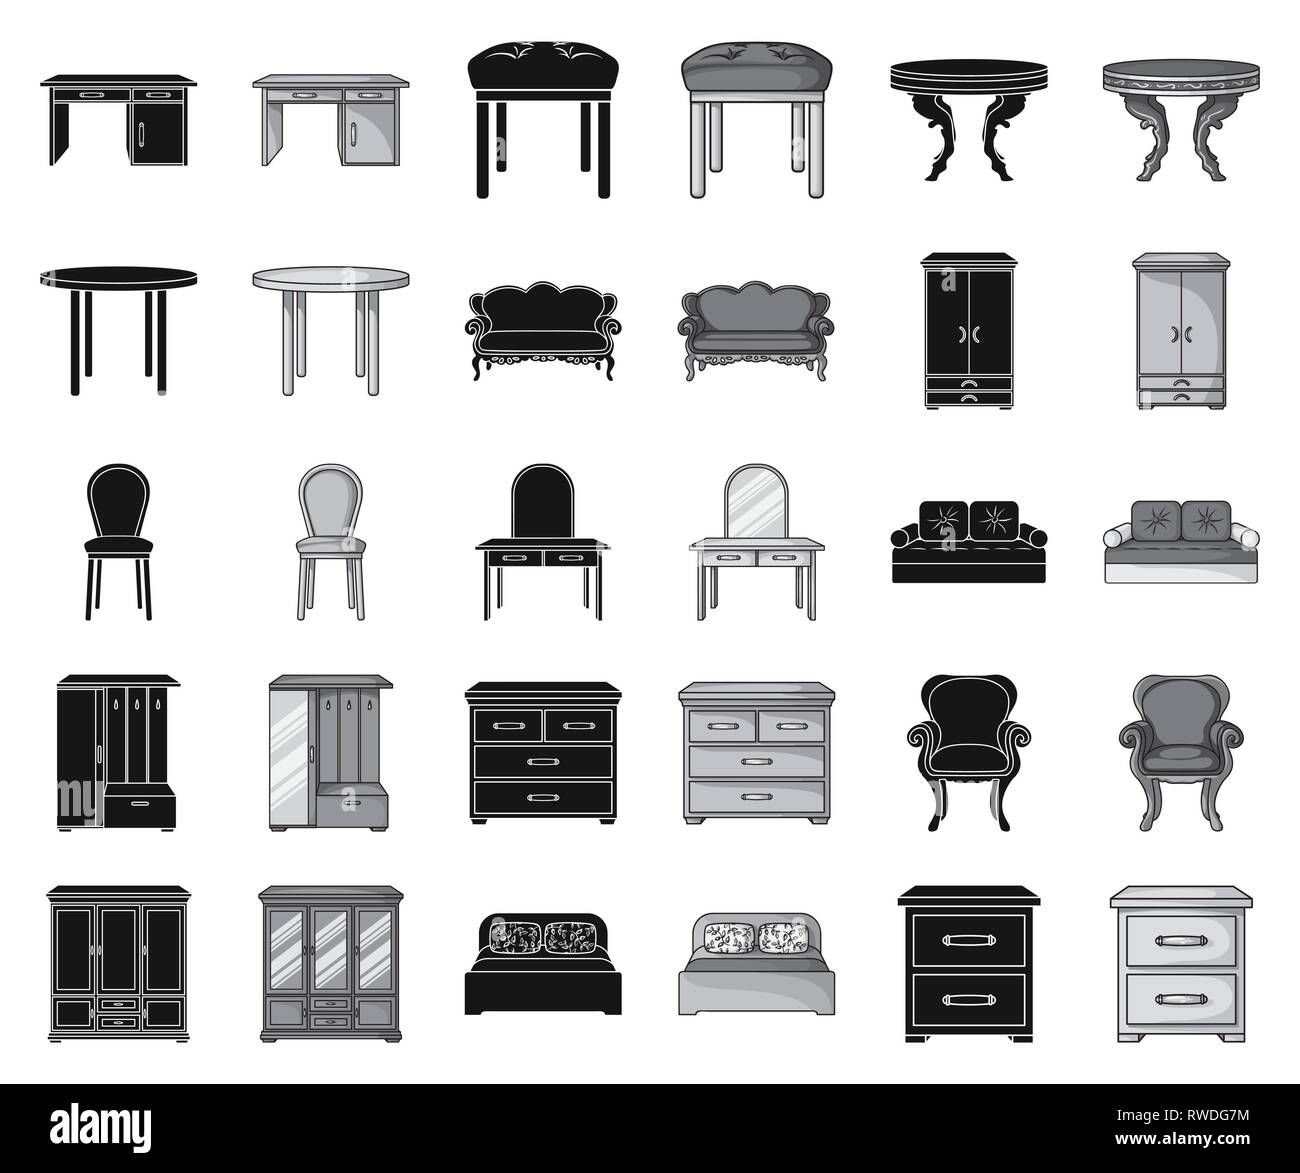 accessory,apartment,armchair,art,back,baroque,bed,bedside,black,monochrome,cabinet,chair,classical,closet,collection,couch,cupboard,design,desk,double,drawers,dressing,furnishing,furniture,home,house,icon,illustration,interior,isolated,logo,modern,office,retro,round,set,sign,sofa,stool,symbol,table,various,vector,vestibule,vintage,wardrobe,web,wing,wooden Vector Vectors , Stock Vector